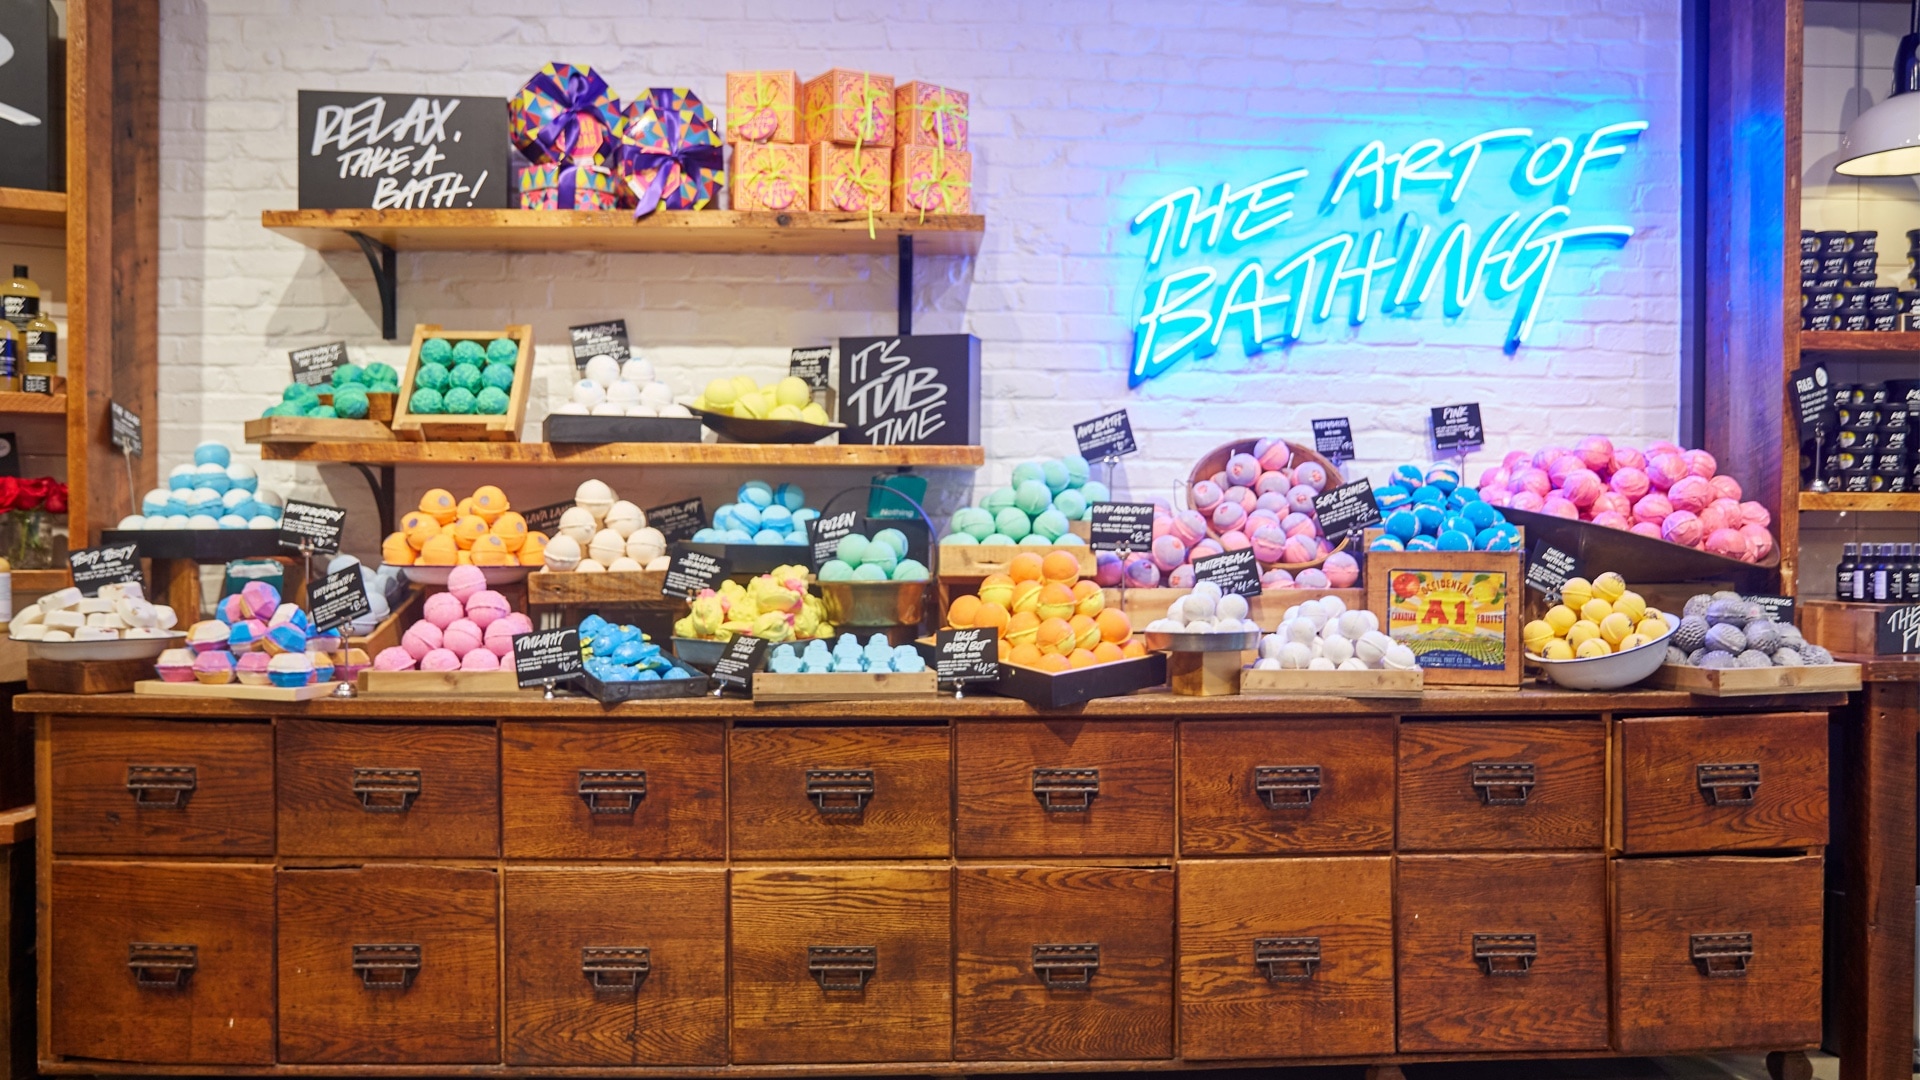 "The Art of Bathing" is written against a wall in a blue neon sign, below is a table filled with neat piles of color coded bath products with chalk signs that say "Relax take a Bath" and "It's Tub Time"